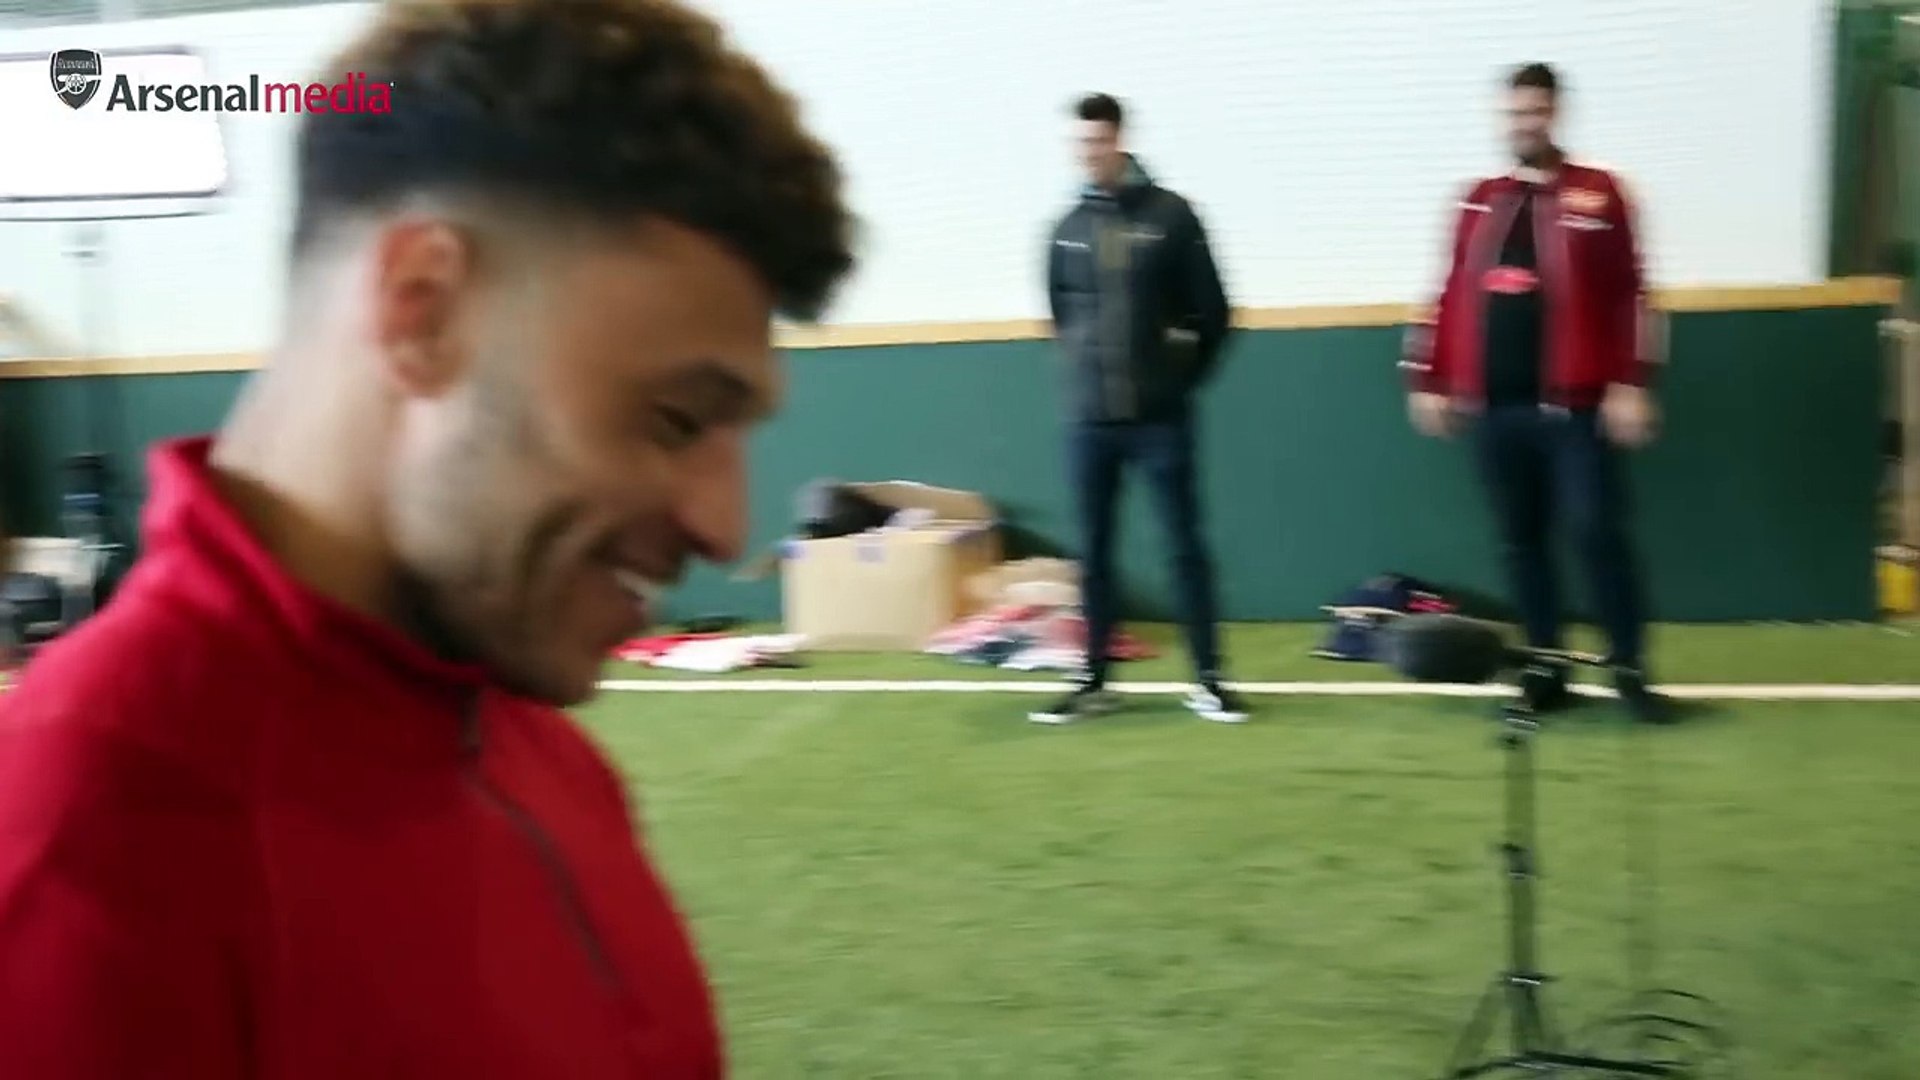 The Ox, Ramsey and Chambers attempt golf trick shots